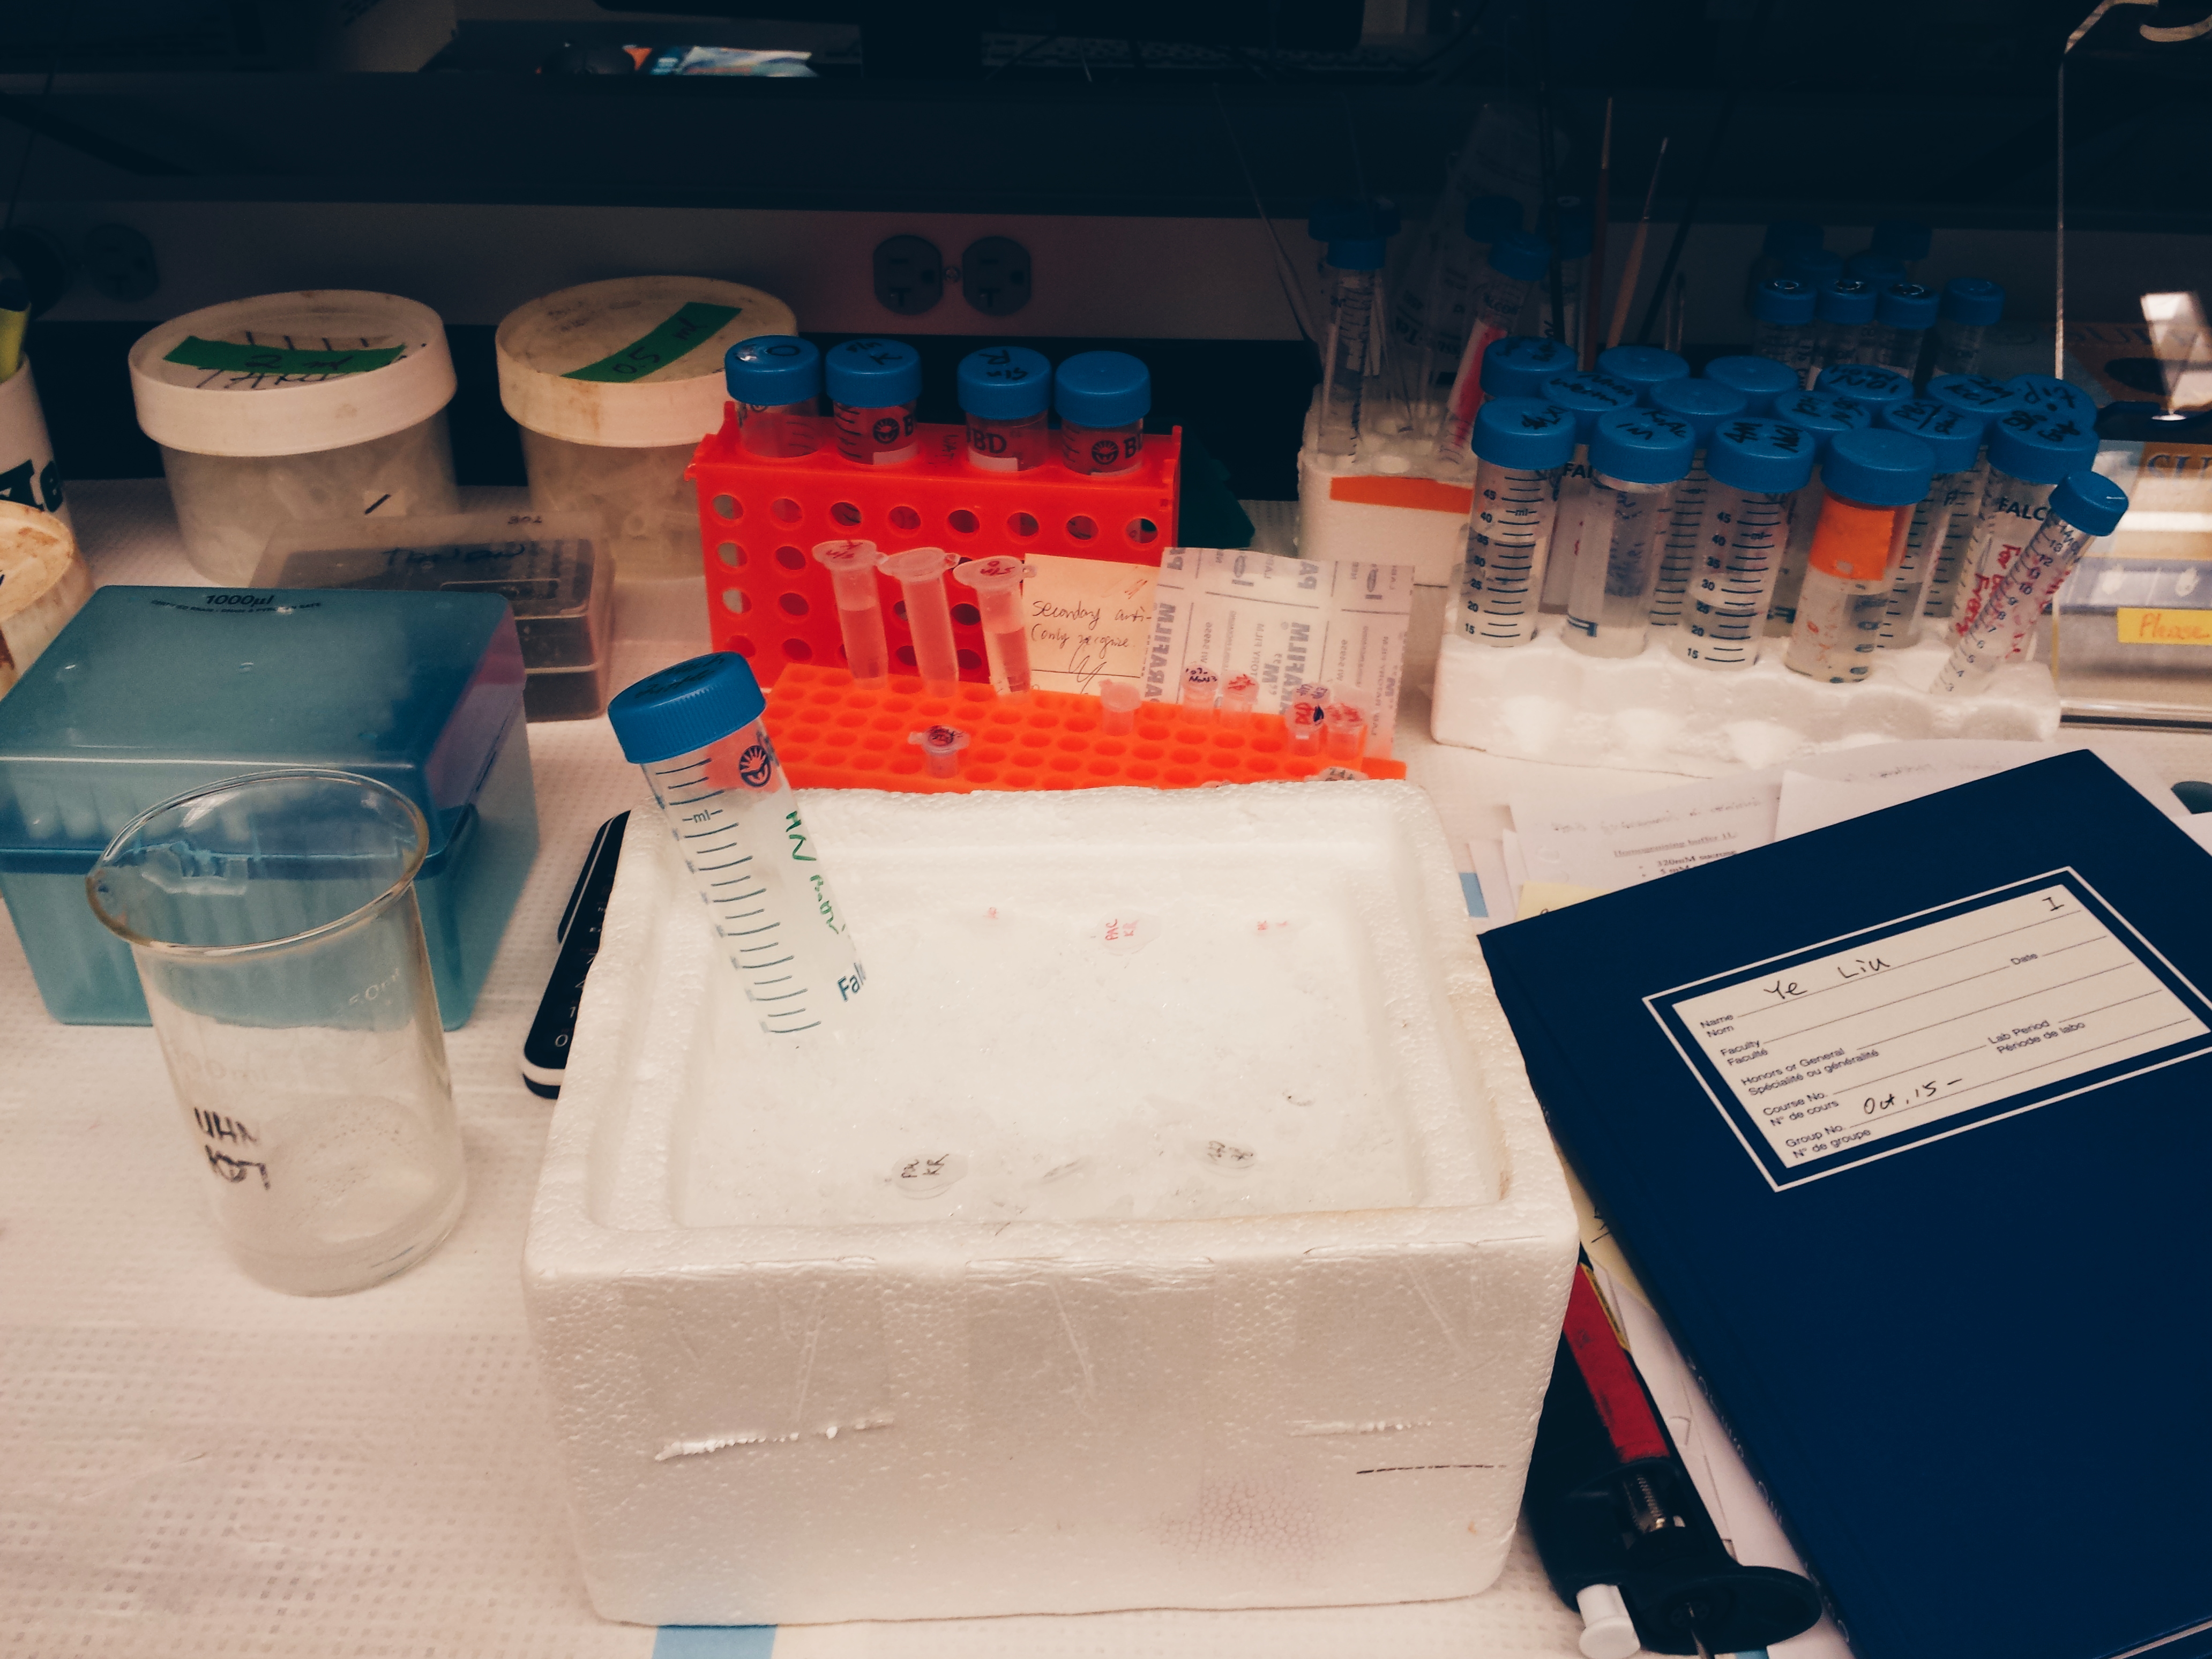 A picture of my lab bench with an ice bucket and various tubes filled with chemicals, a lab notebook, beakers, etc.